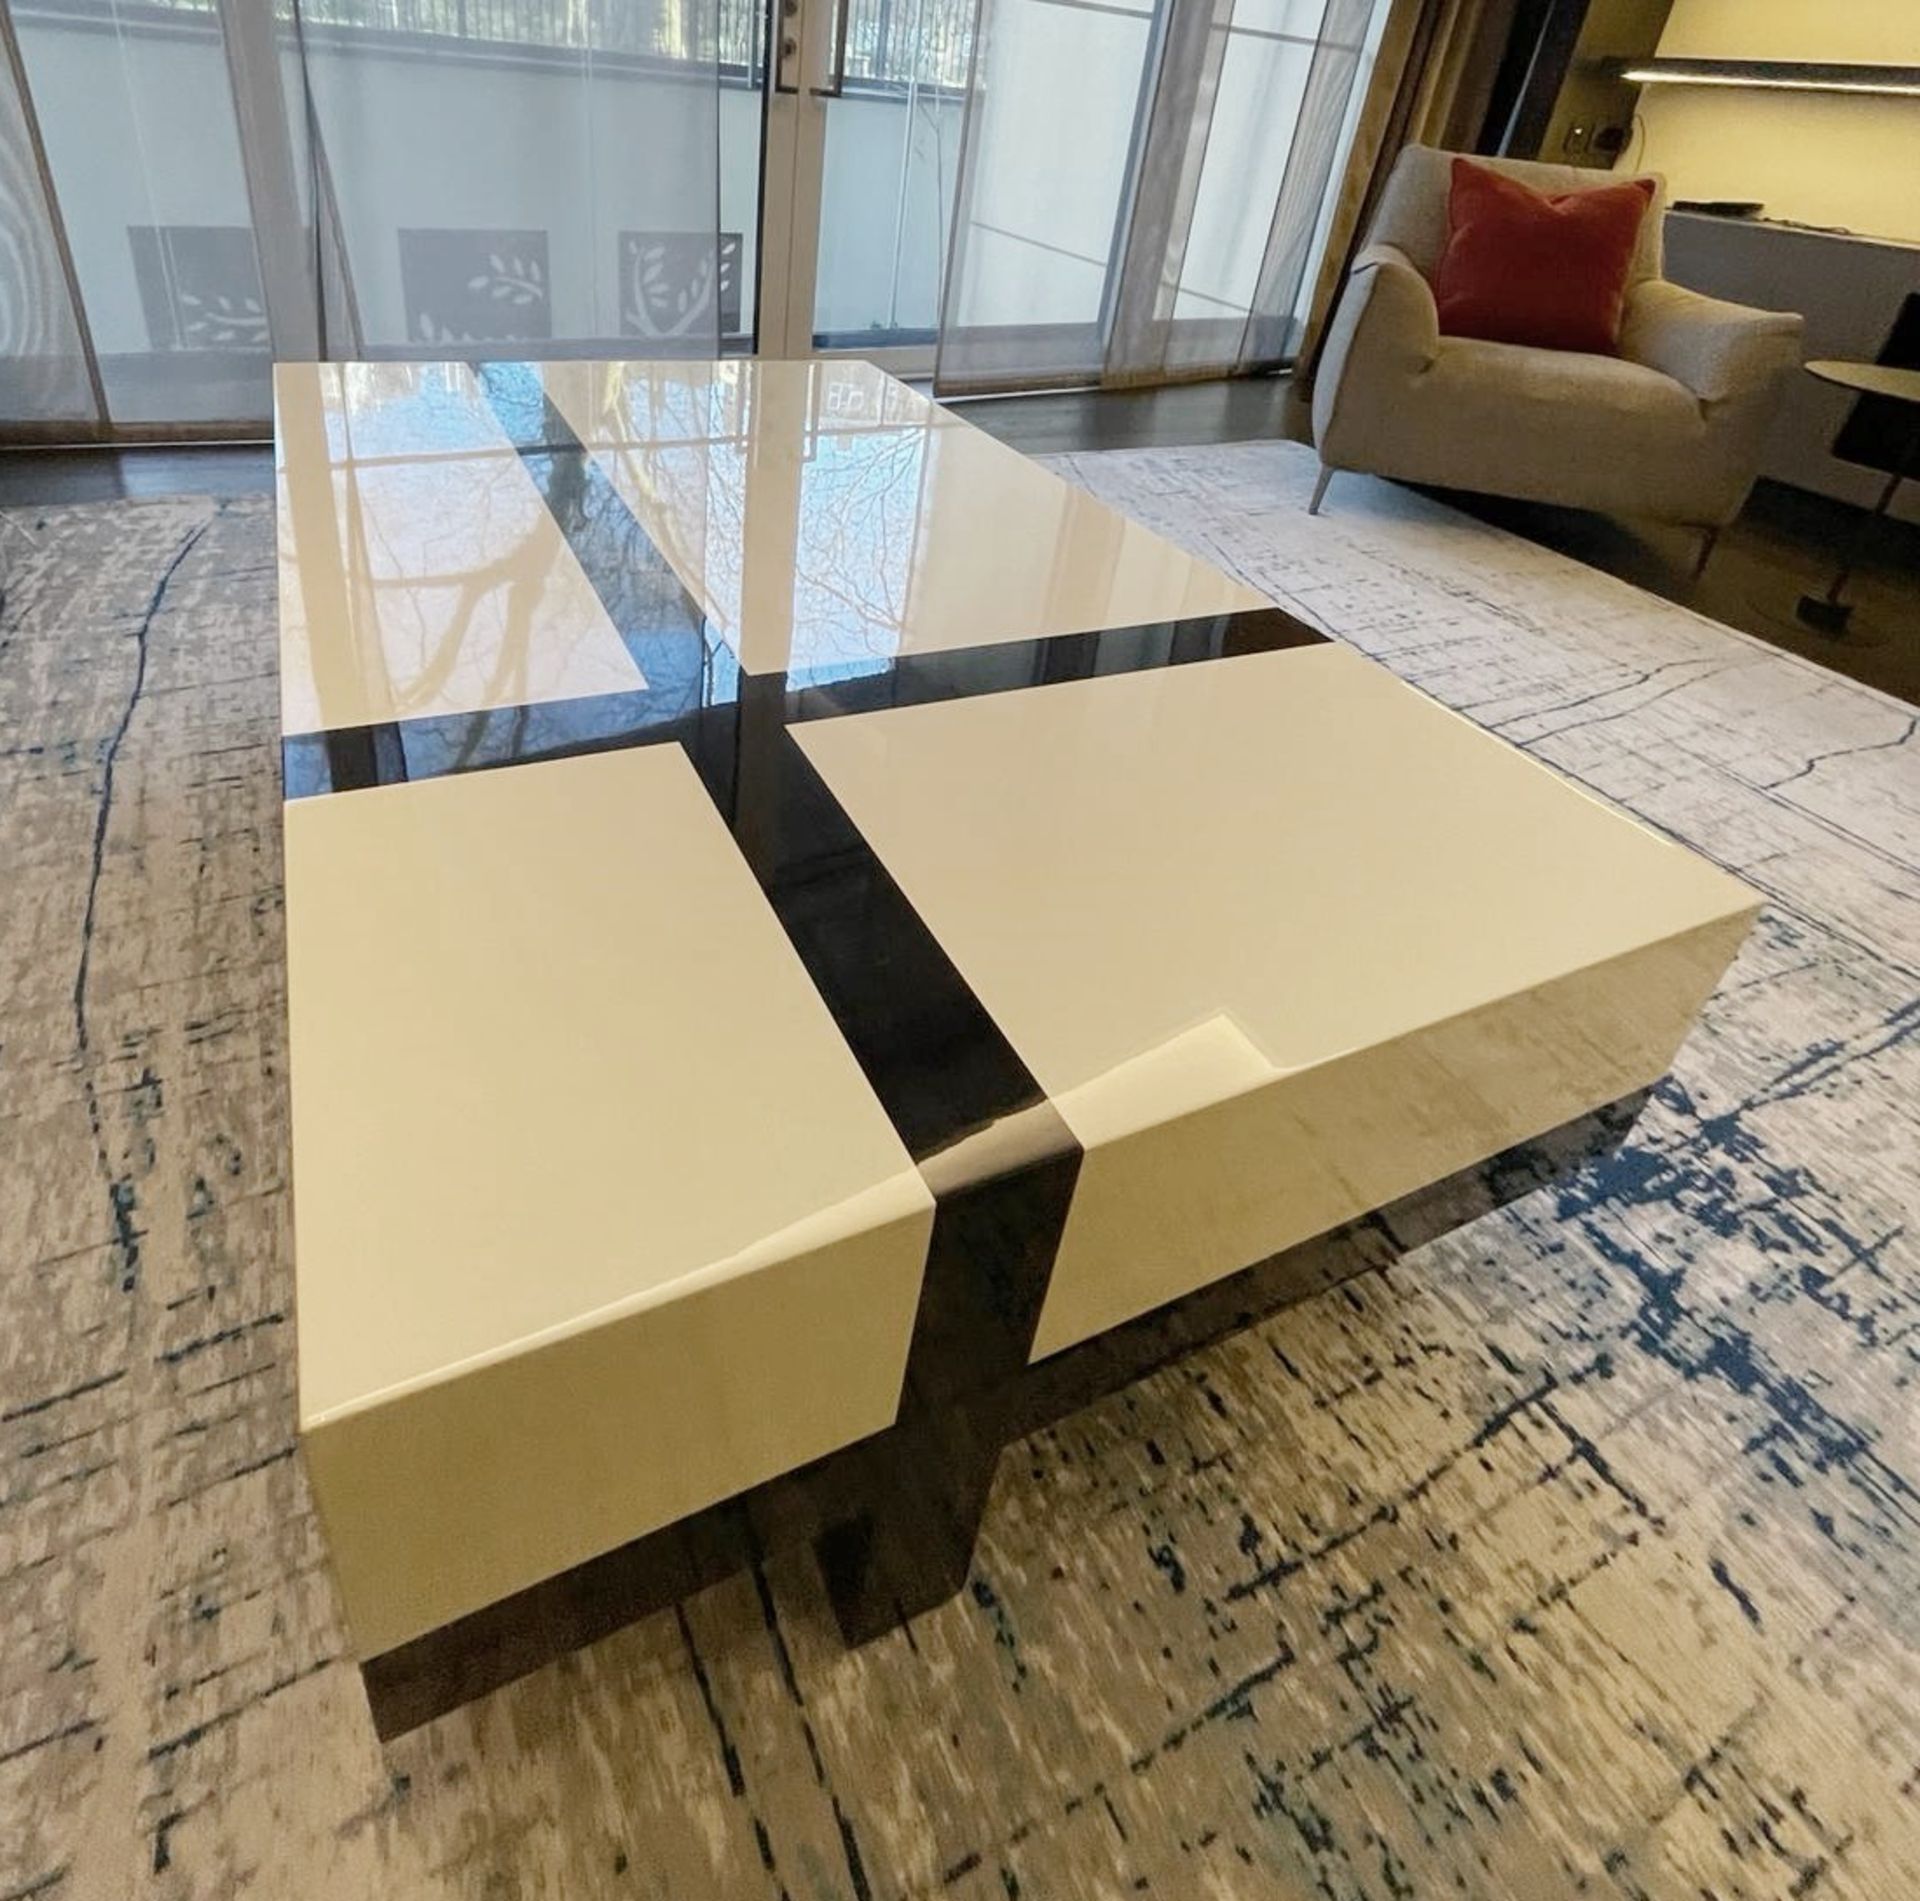 1 x DAVIDSON LONDON 'Melrose' Rectangular 1.5-Metre Centrepiece Coffee Table with High-gloss Finish - Image 9 of 12